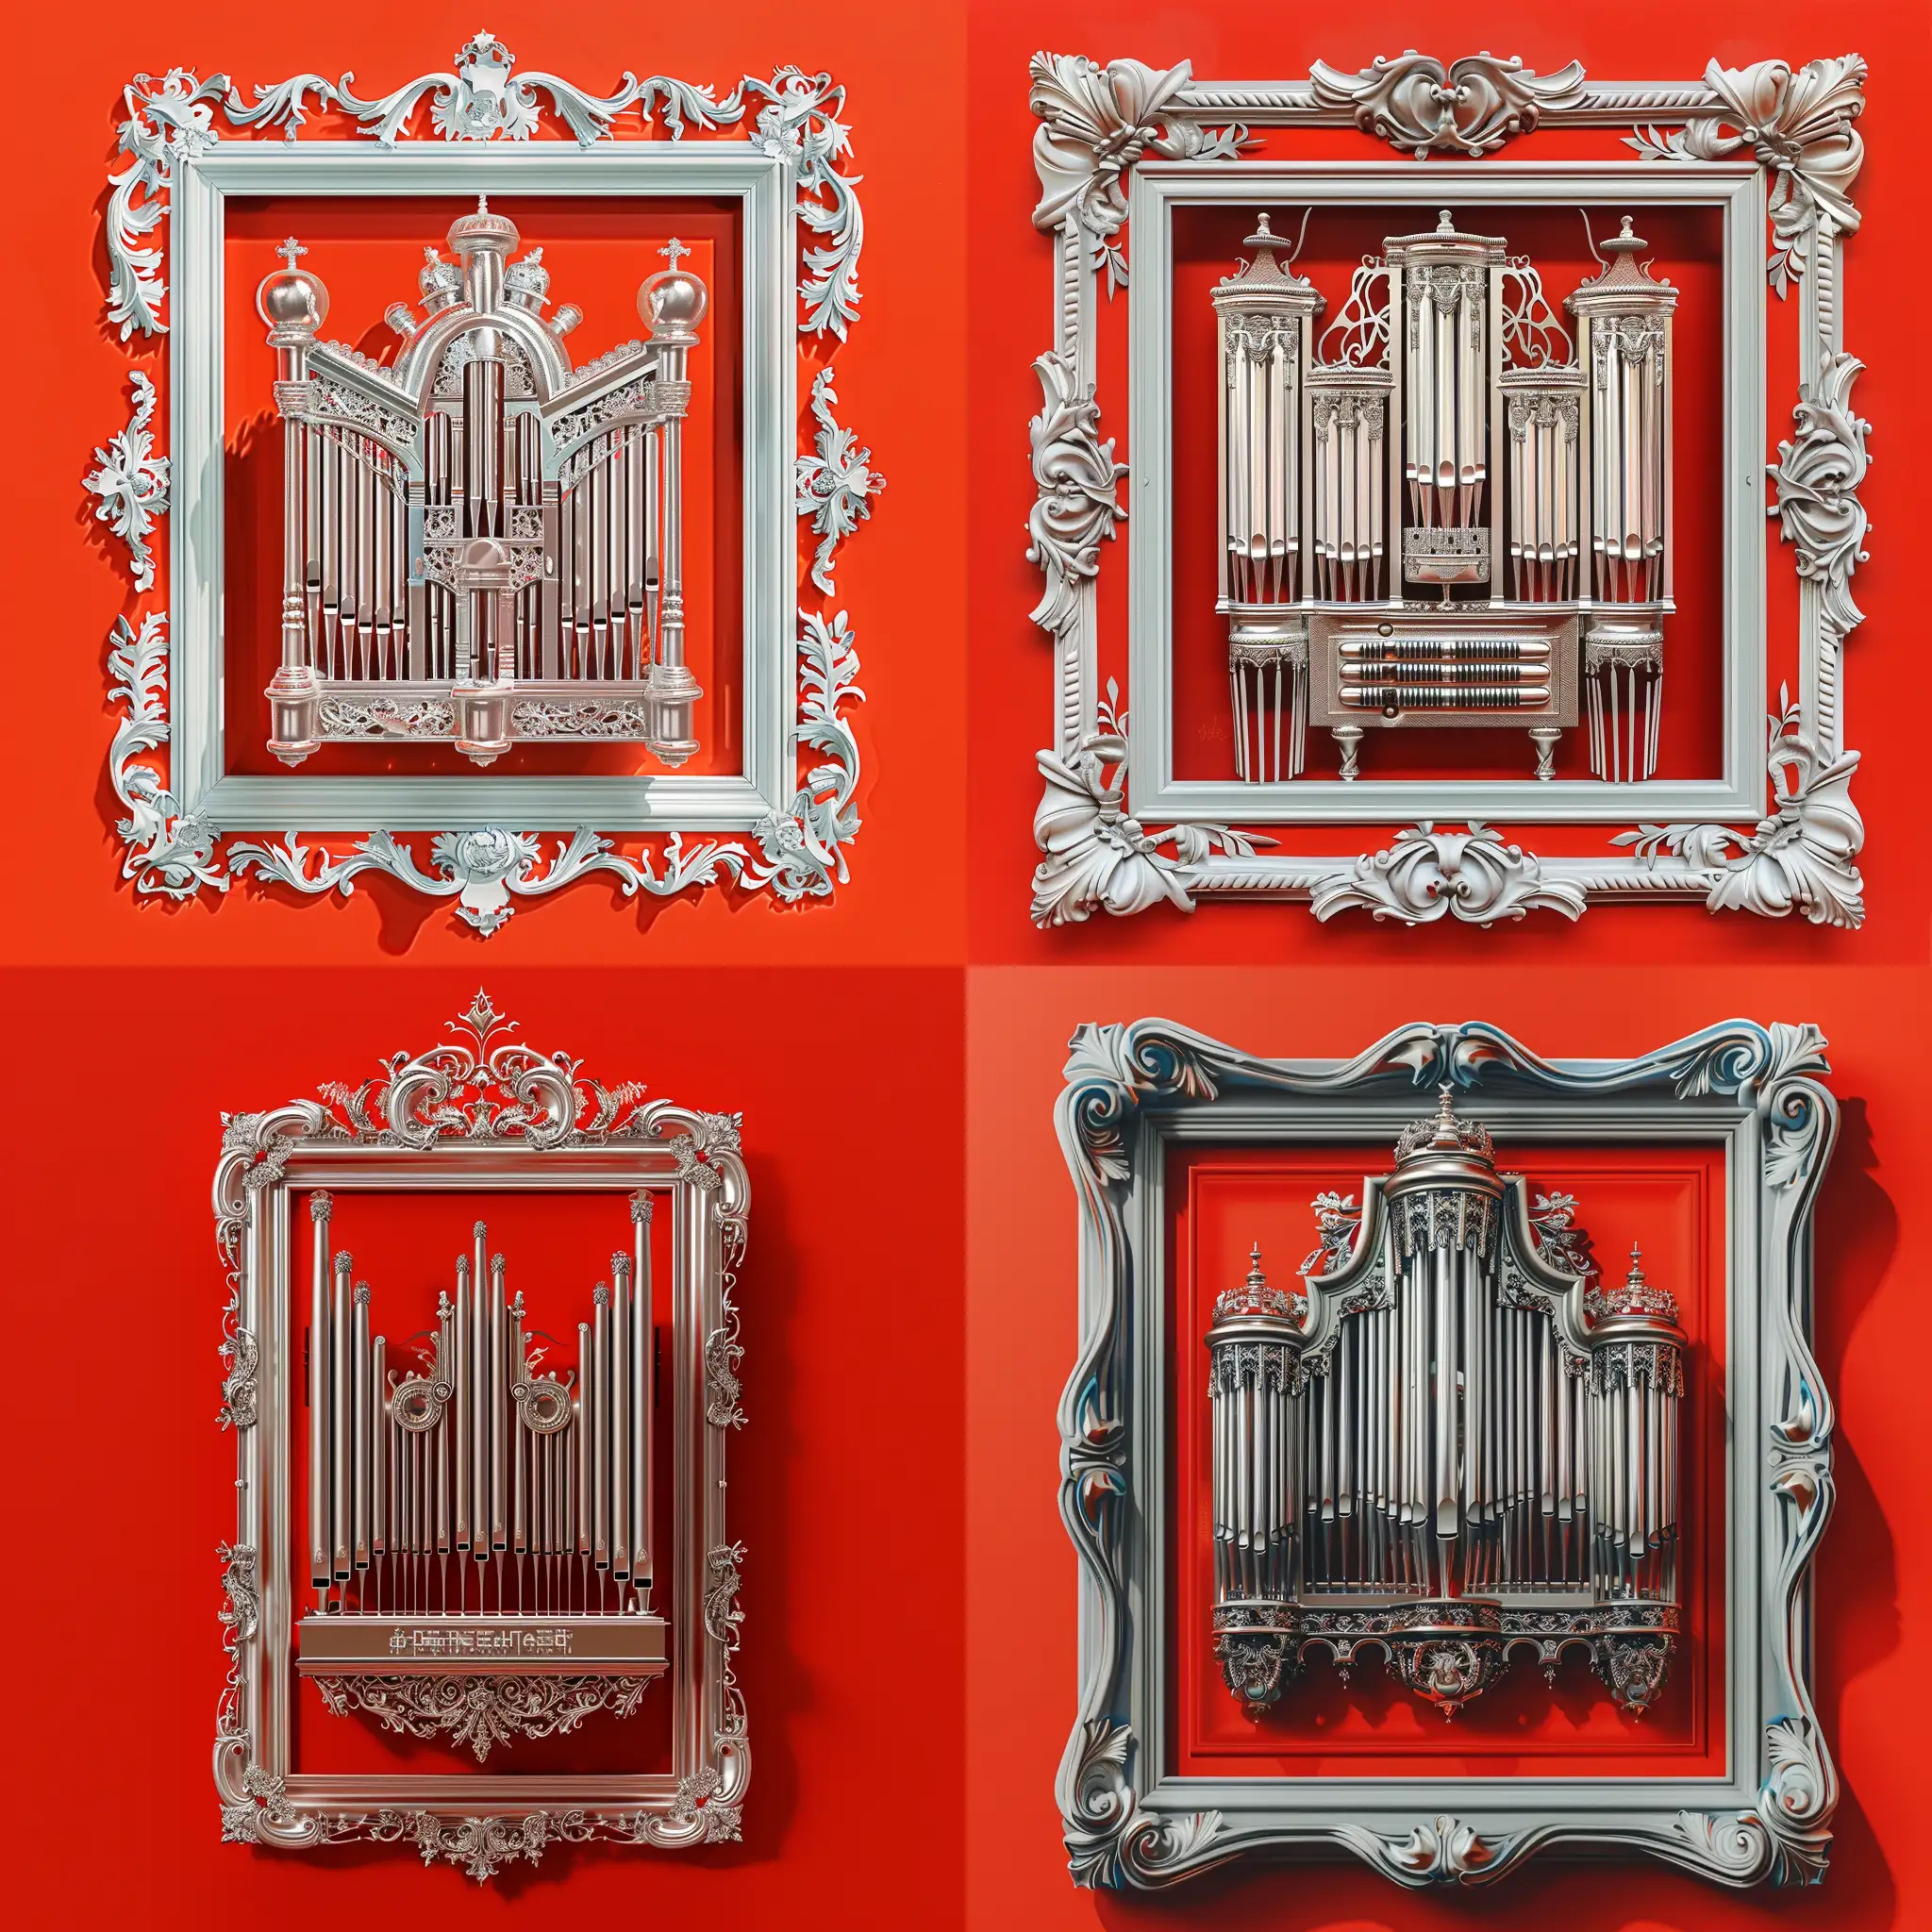 Silver-Slavic-Organ-on-Bright-Red-Background-with-Delicate-Frame